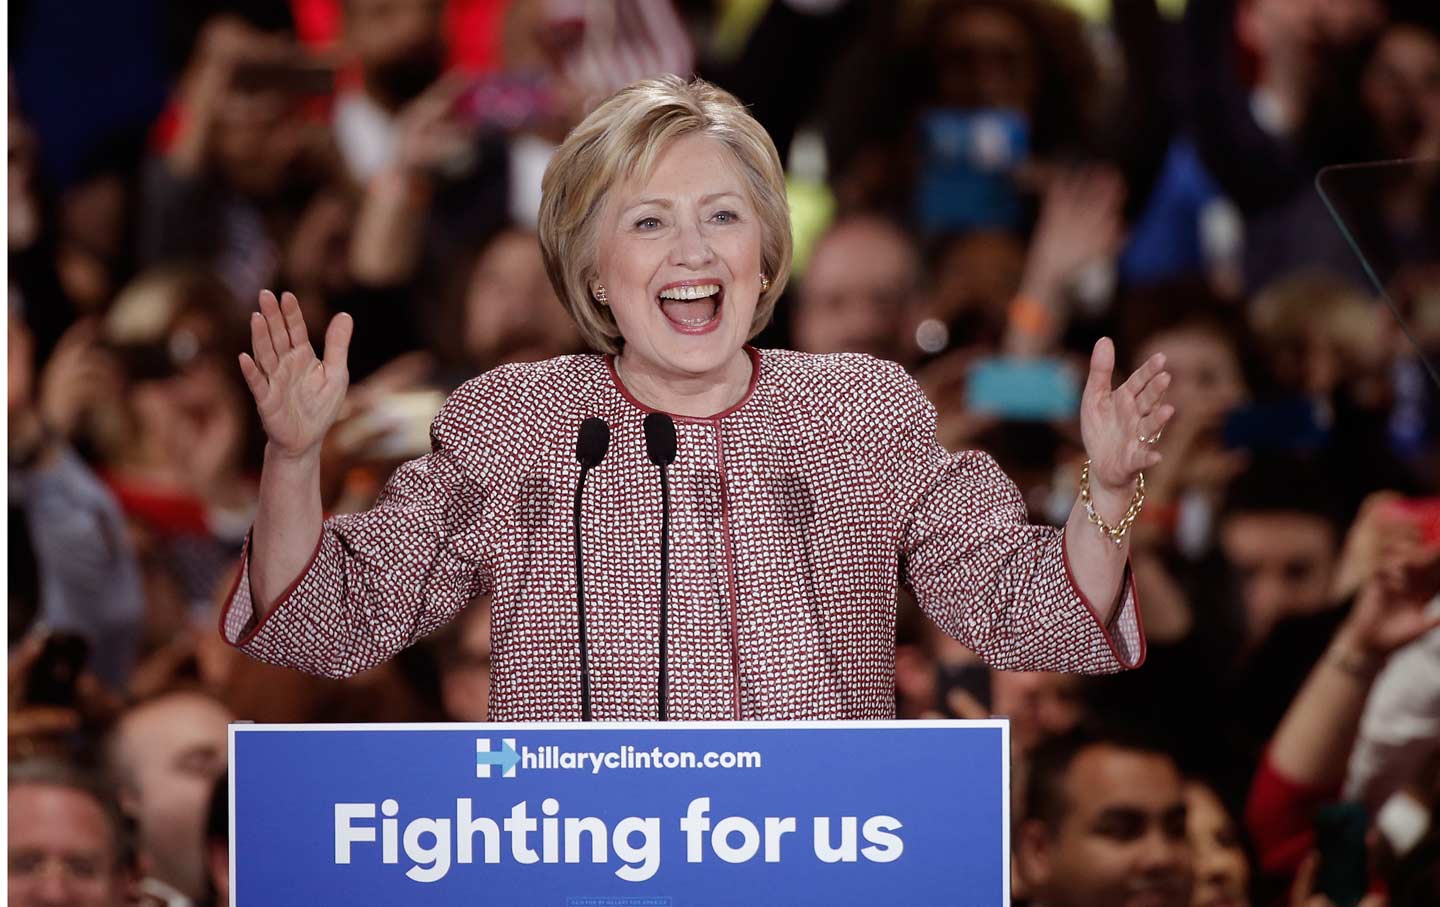 Hillary Clinton’s Win in New York Raises Tough Questions for Bernie Sanders and His Supporters